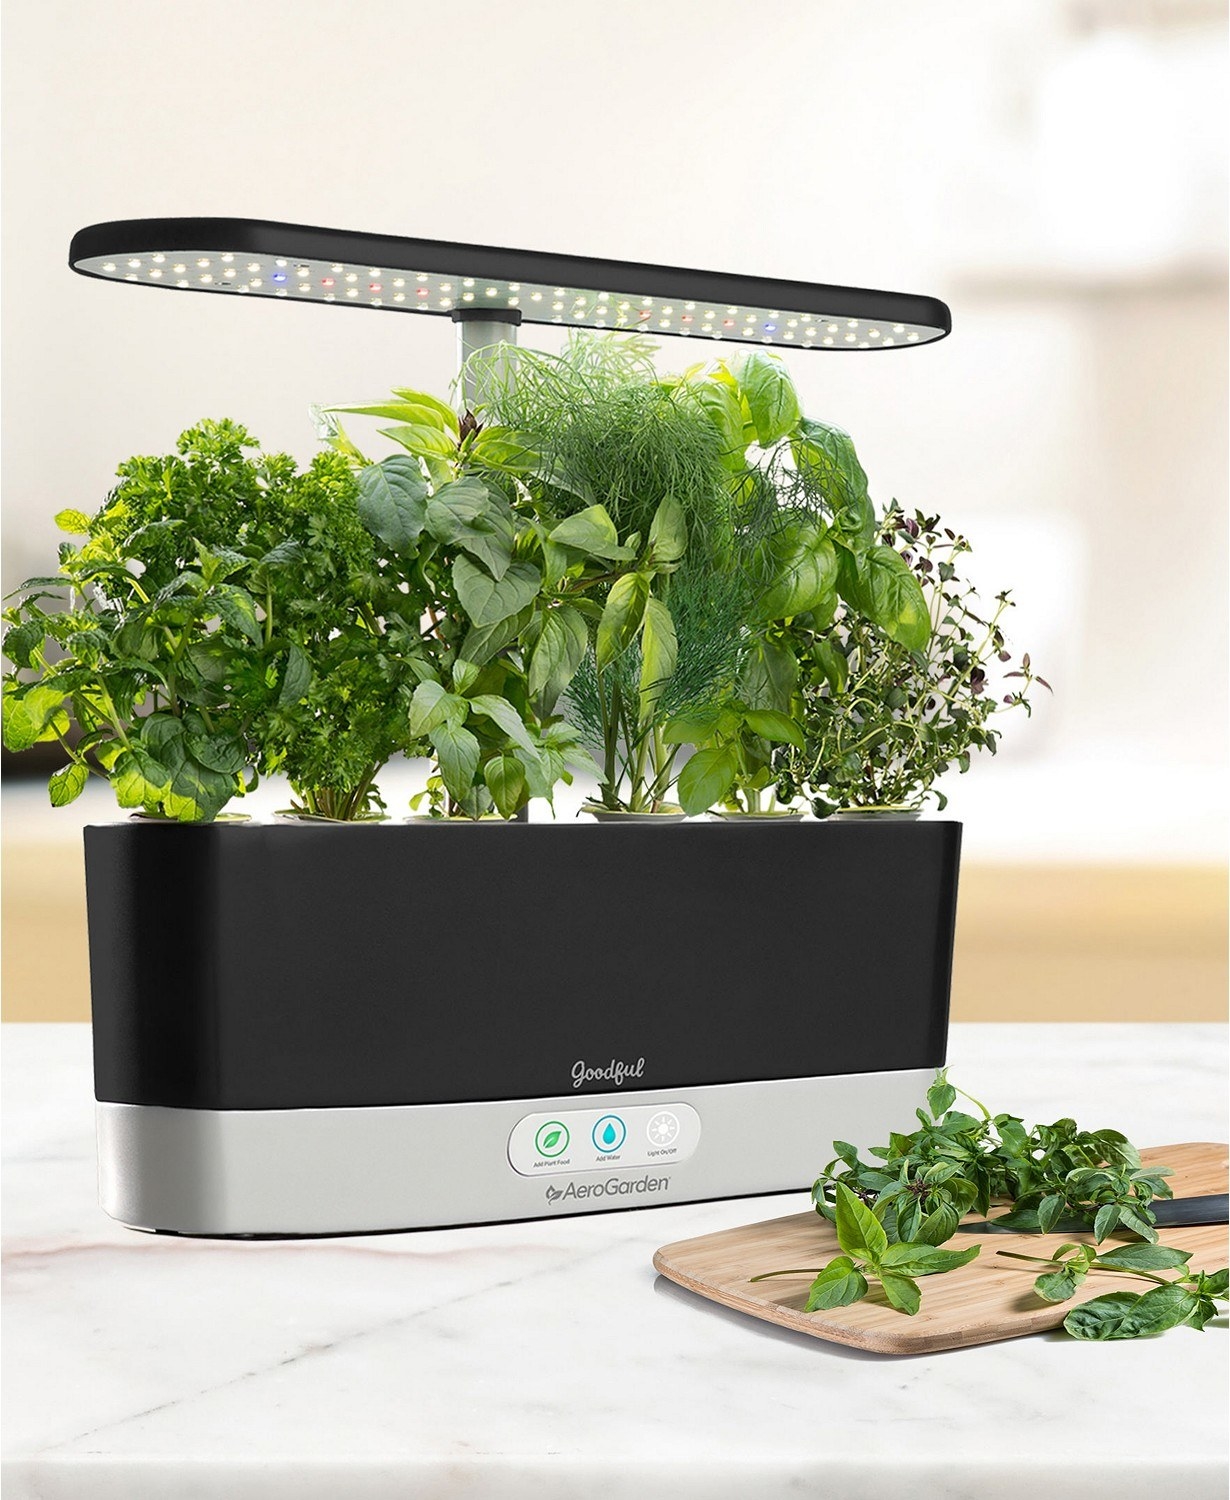 The Aerogarden harvest is about a foot long and about 2 inches wide. It has 3 buttons and green leaves sprouting from the top with an LED lamp sticking up from the bottom and towering over the leaves.